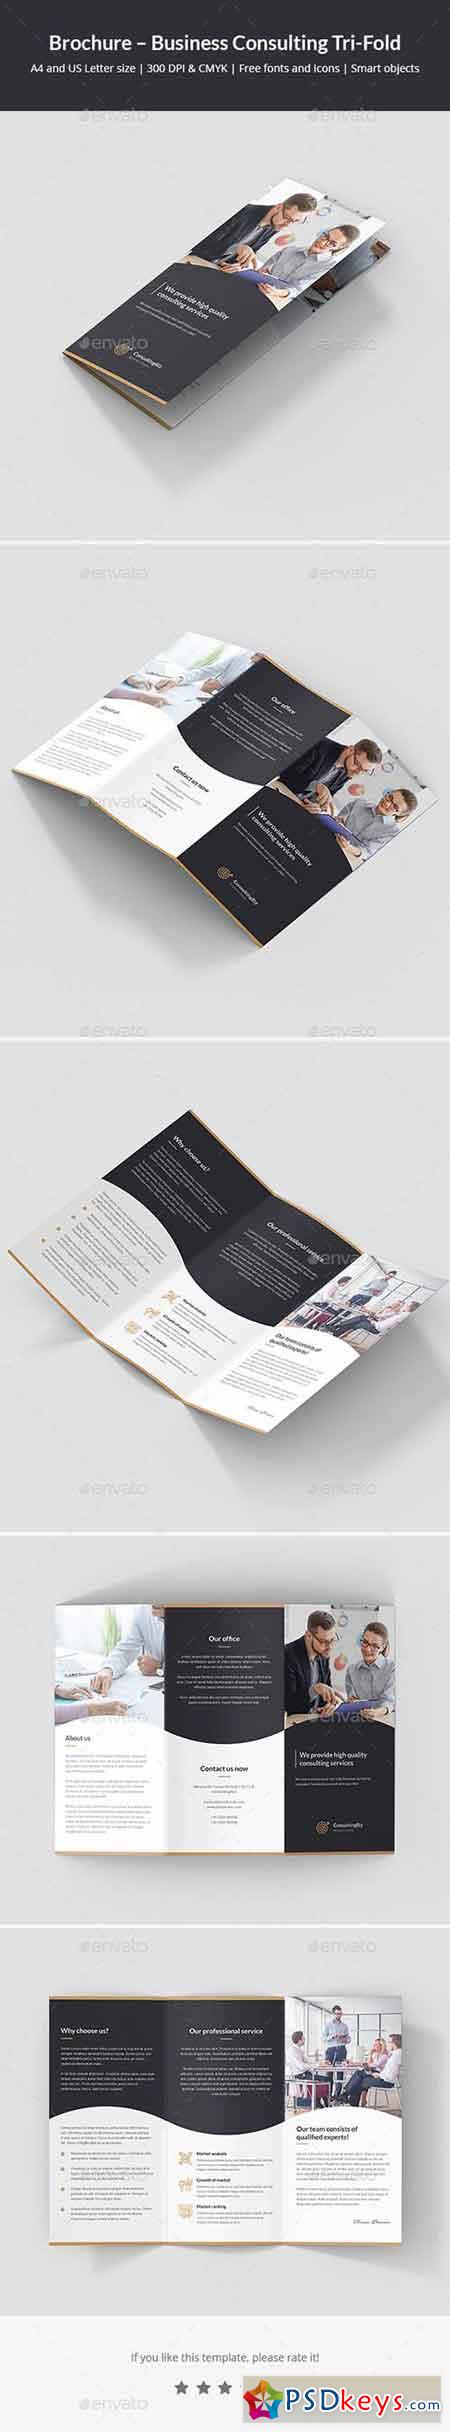 Brochure  Business Consulting Tri-Fold 22015194